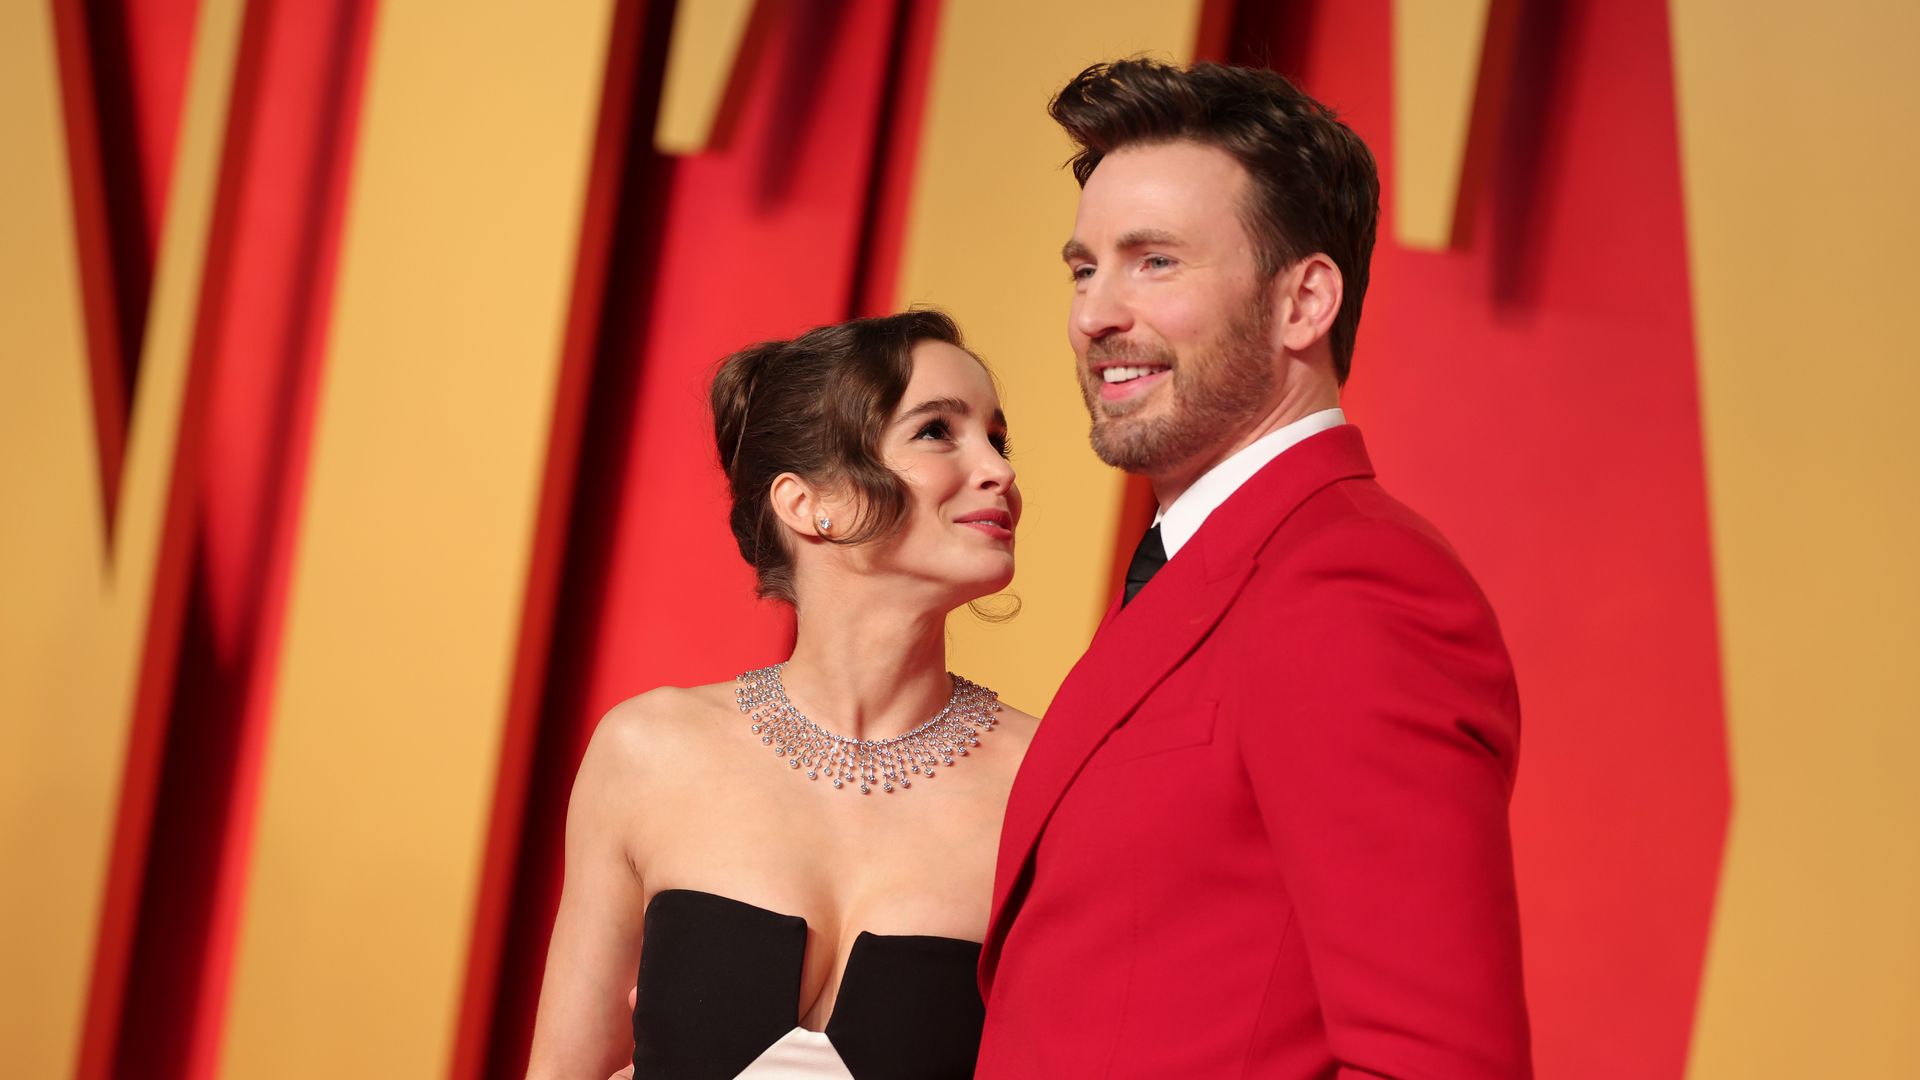 Chris Evans' wife Alba Baptista's subtle matching moment with husband for red carpet debut that you probably missed